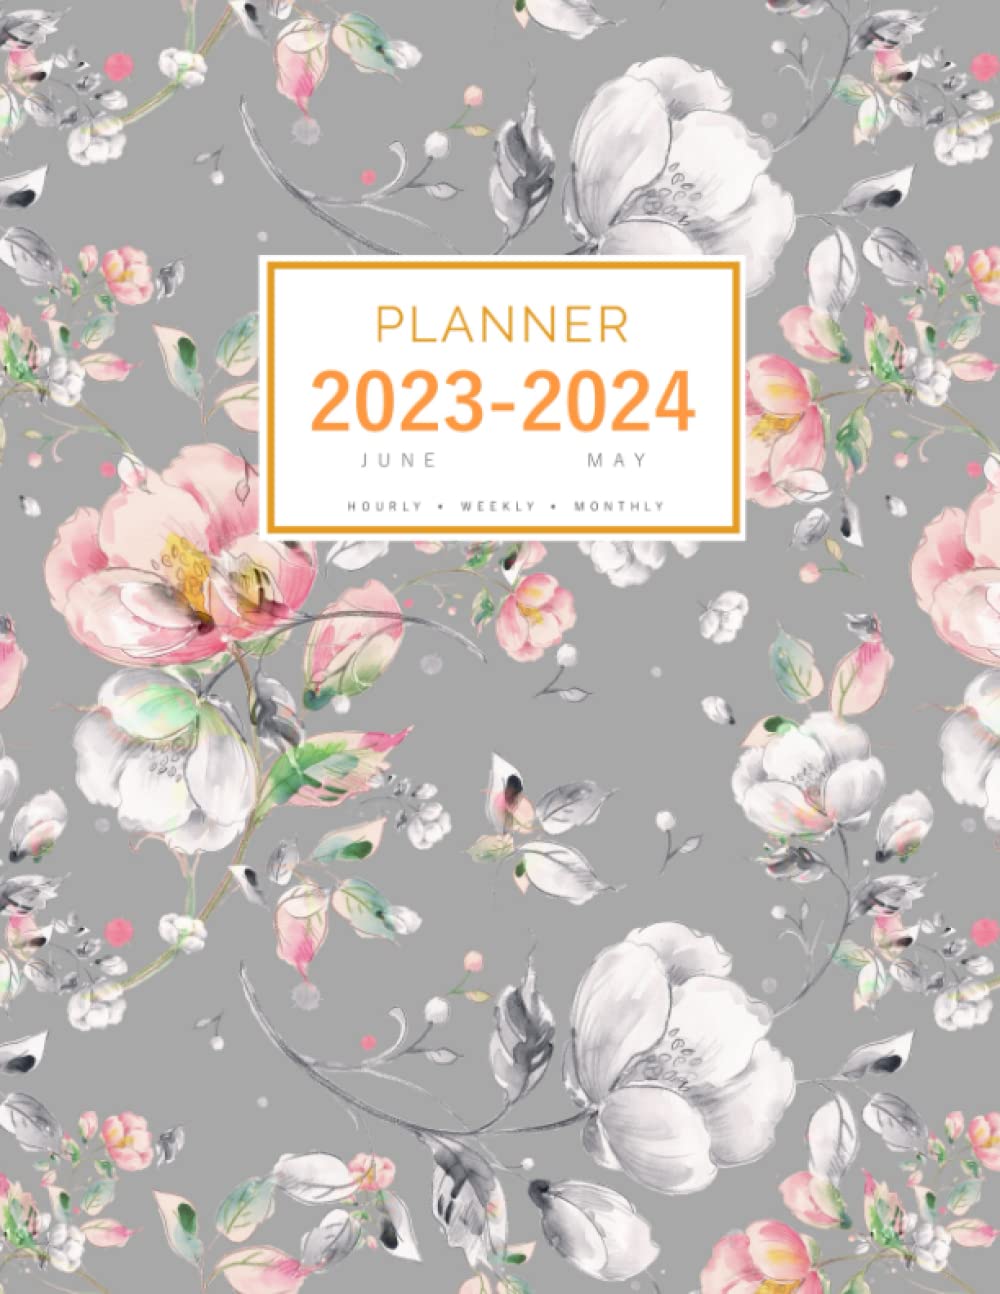 Planner June 2023-2024 May: 8.5 x 11 Large Notebook Organizer with Hourly Time Slots | Beautiful Watercolor Flower Design Gray